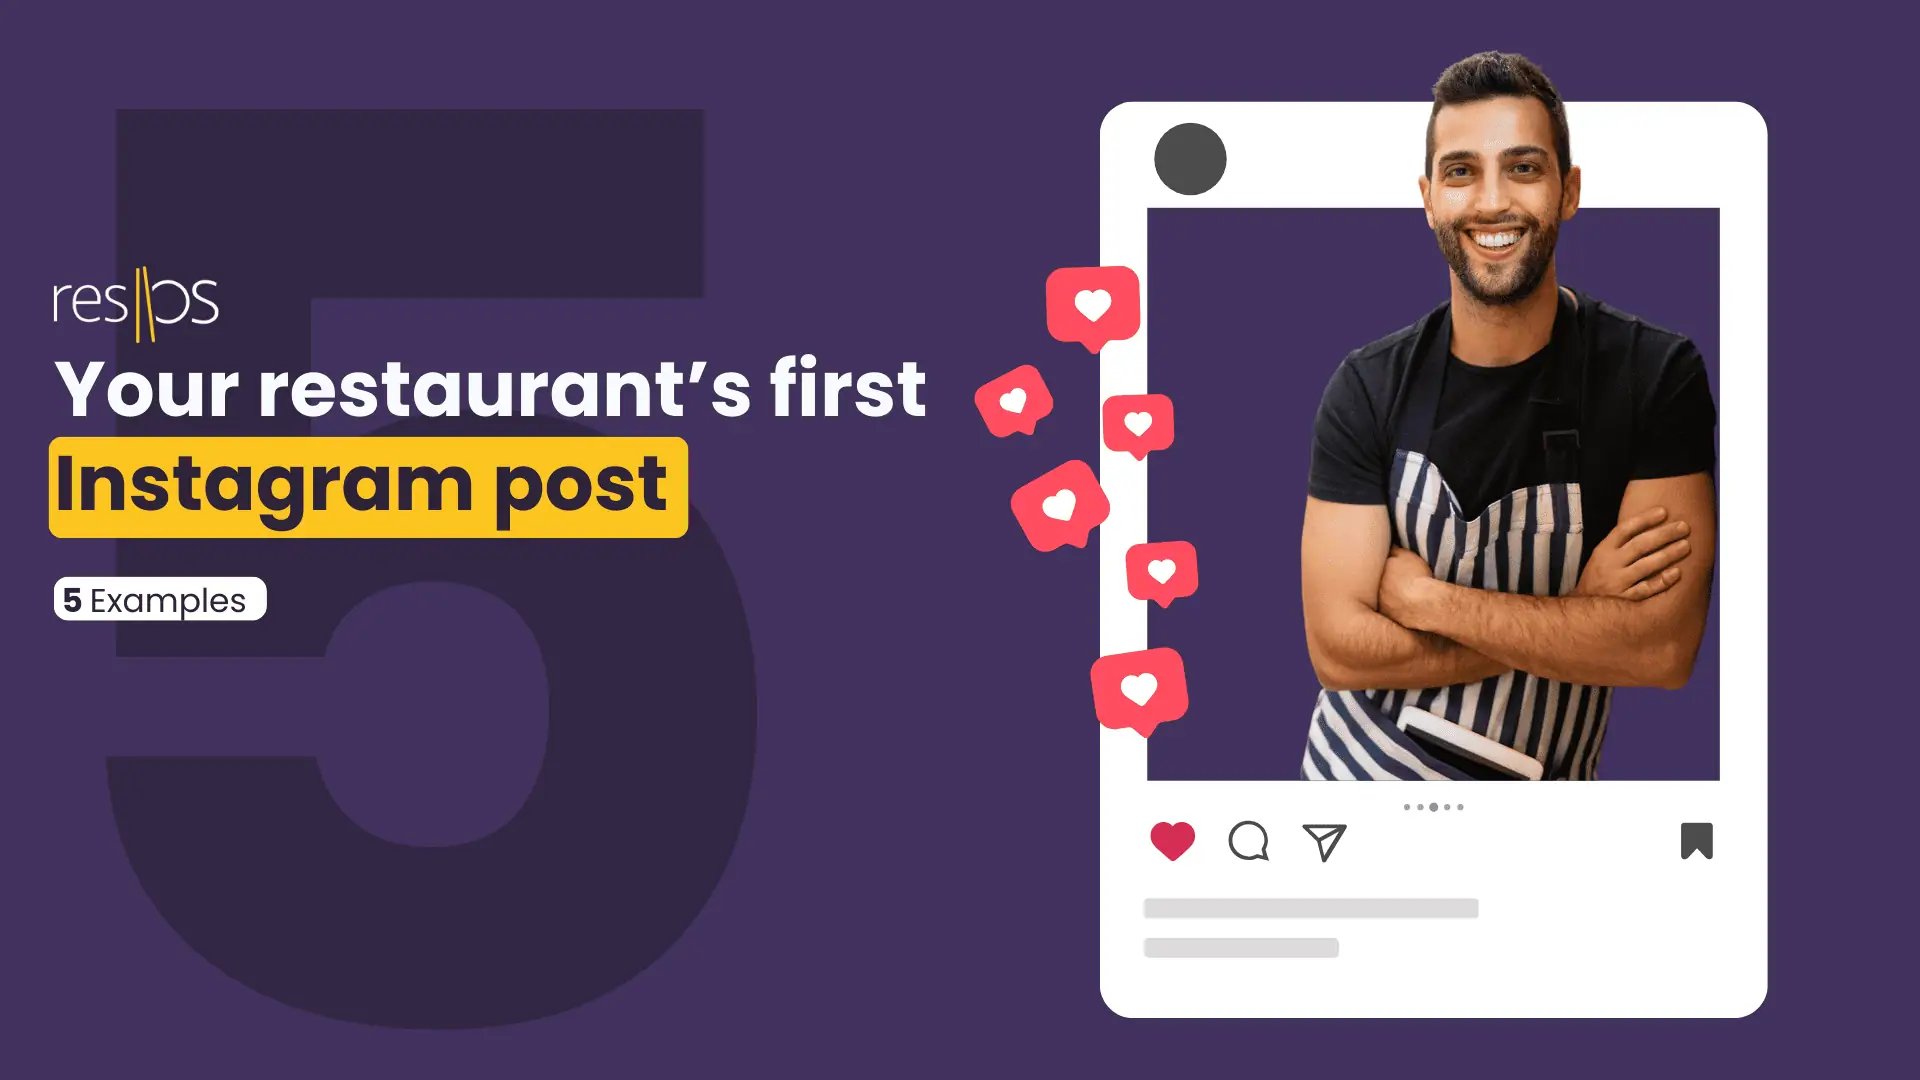 5 examples to inspire your restaurant’s first Instagram post